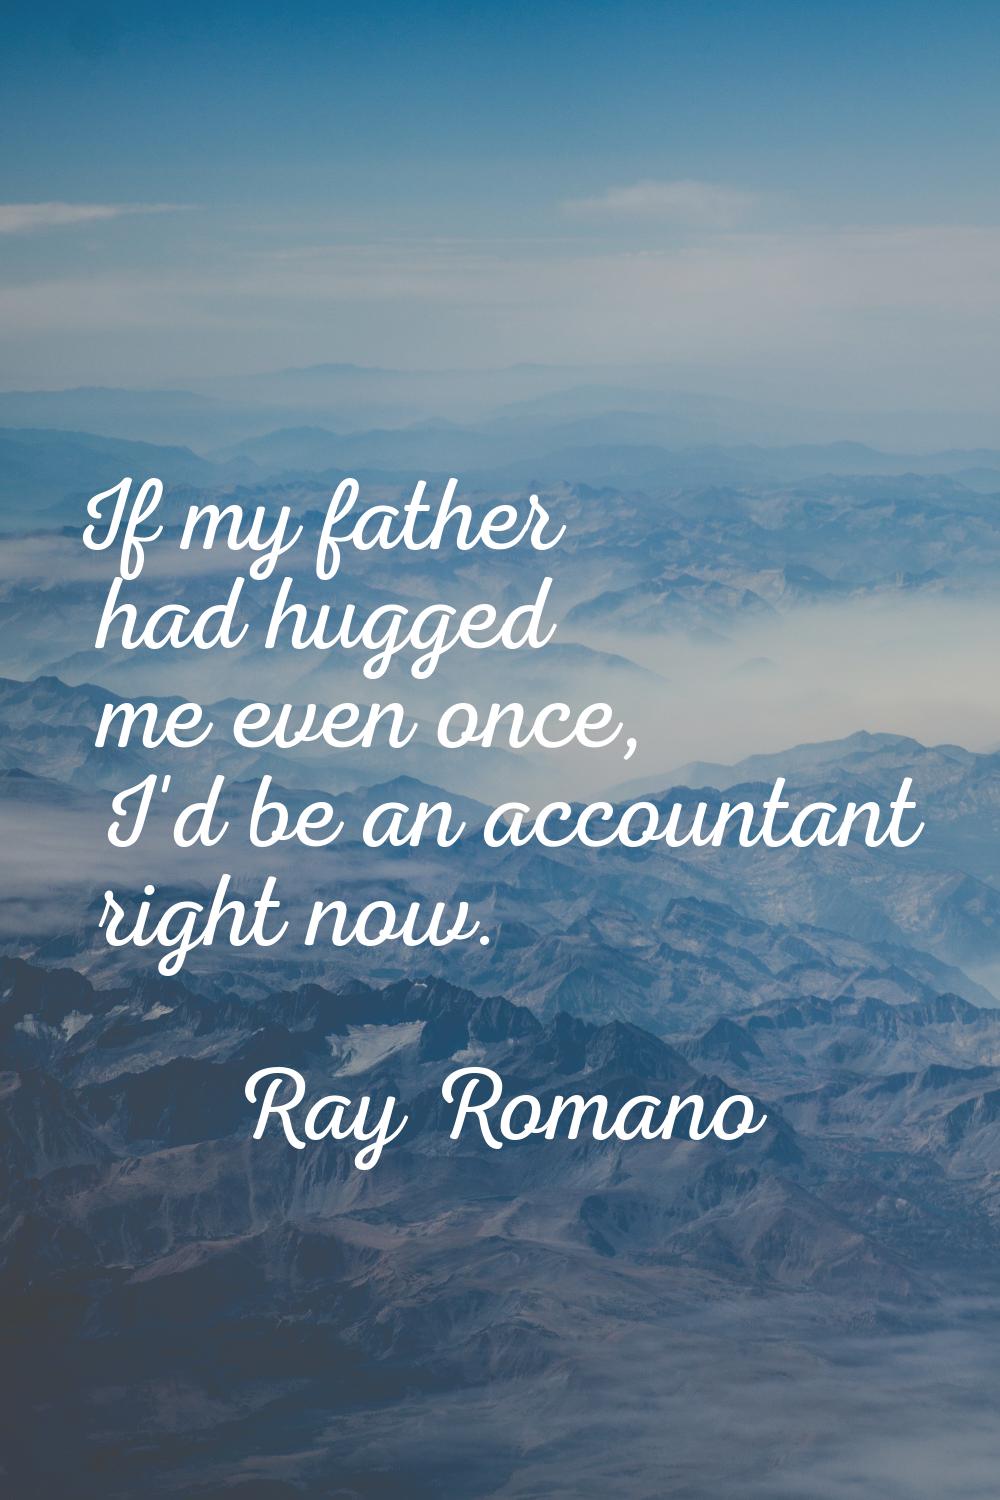 If my father had hugged me even once, I'd be an accountant right now.